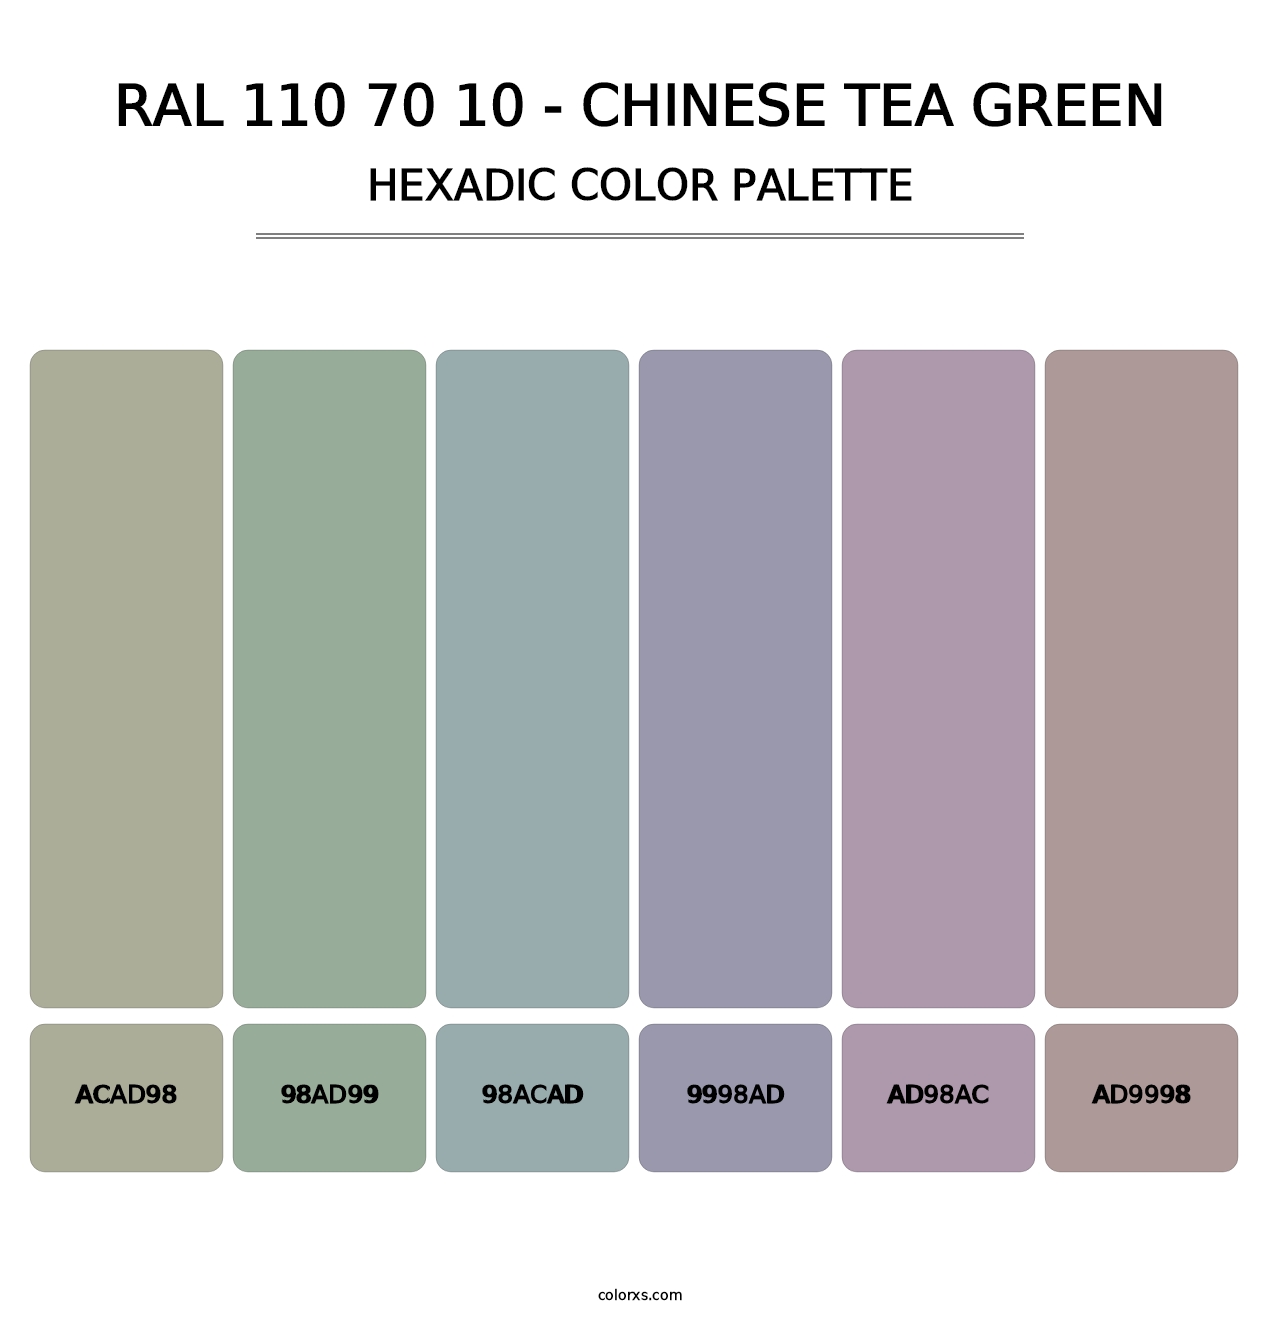 RAL 110 70 10 - Chinese Tea Green - Hexadic Color Palette